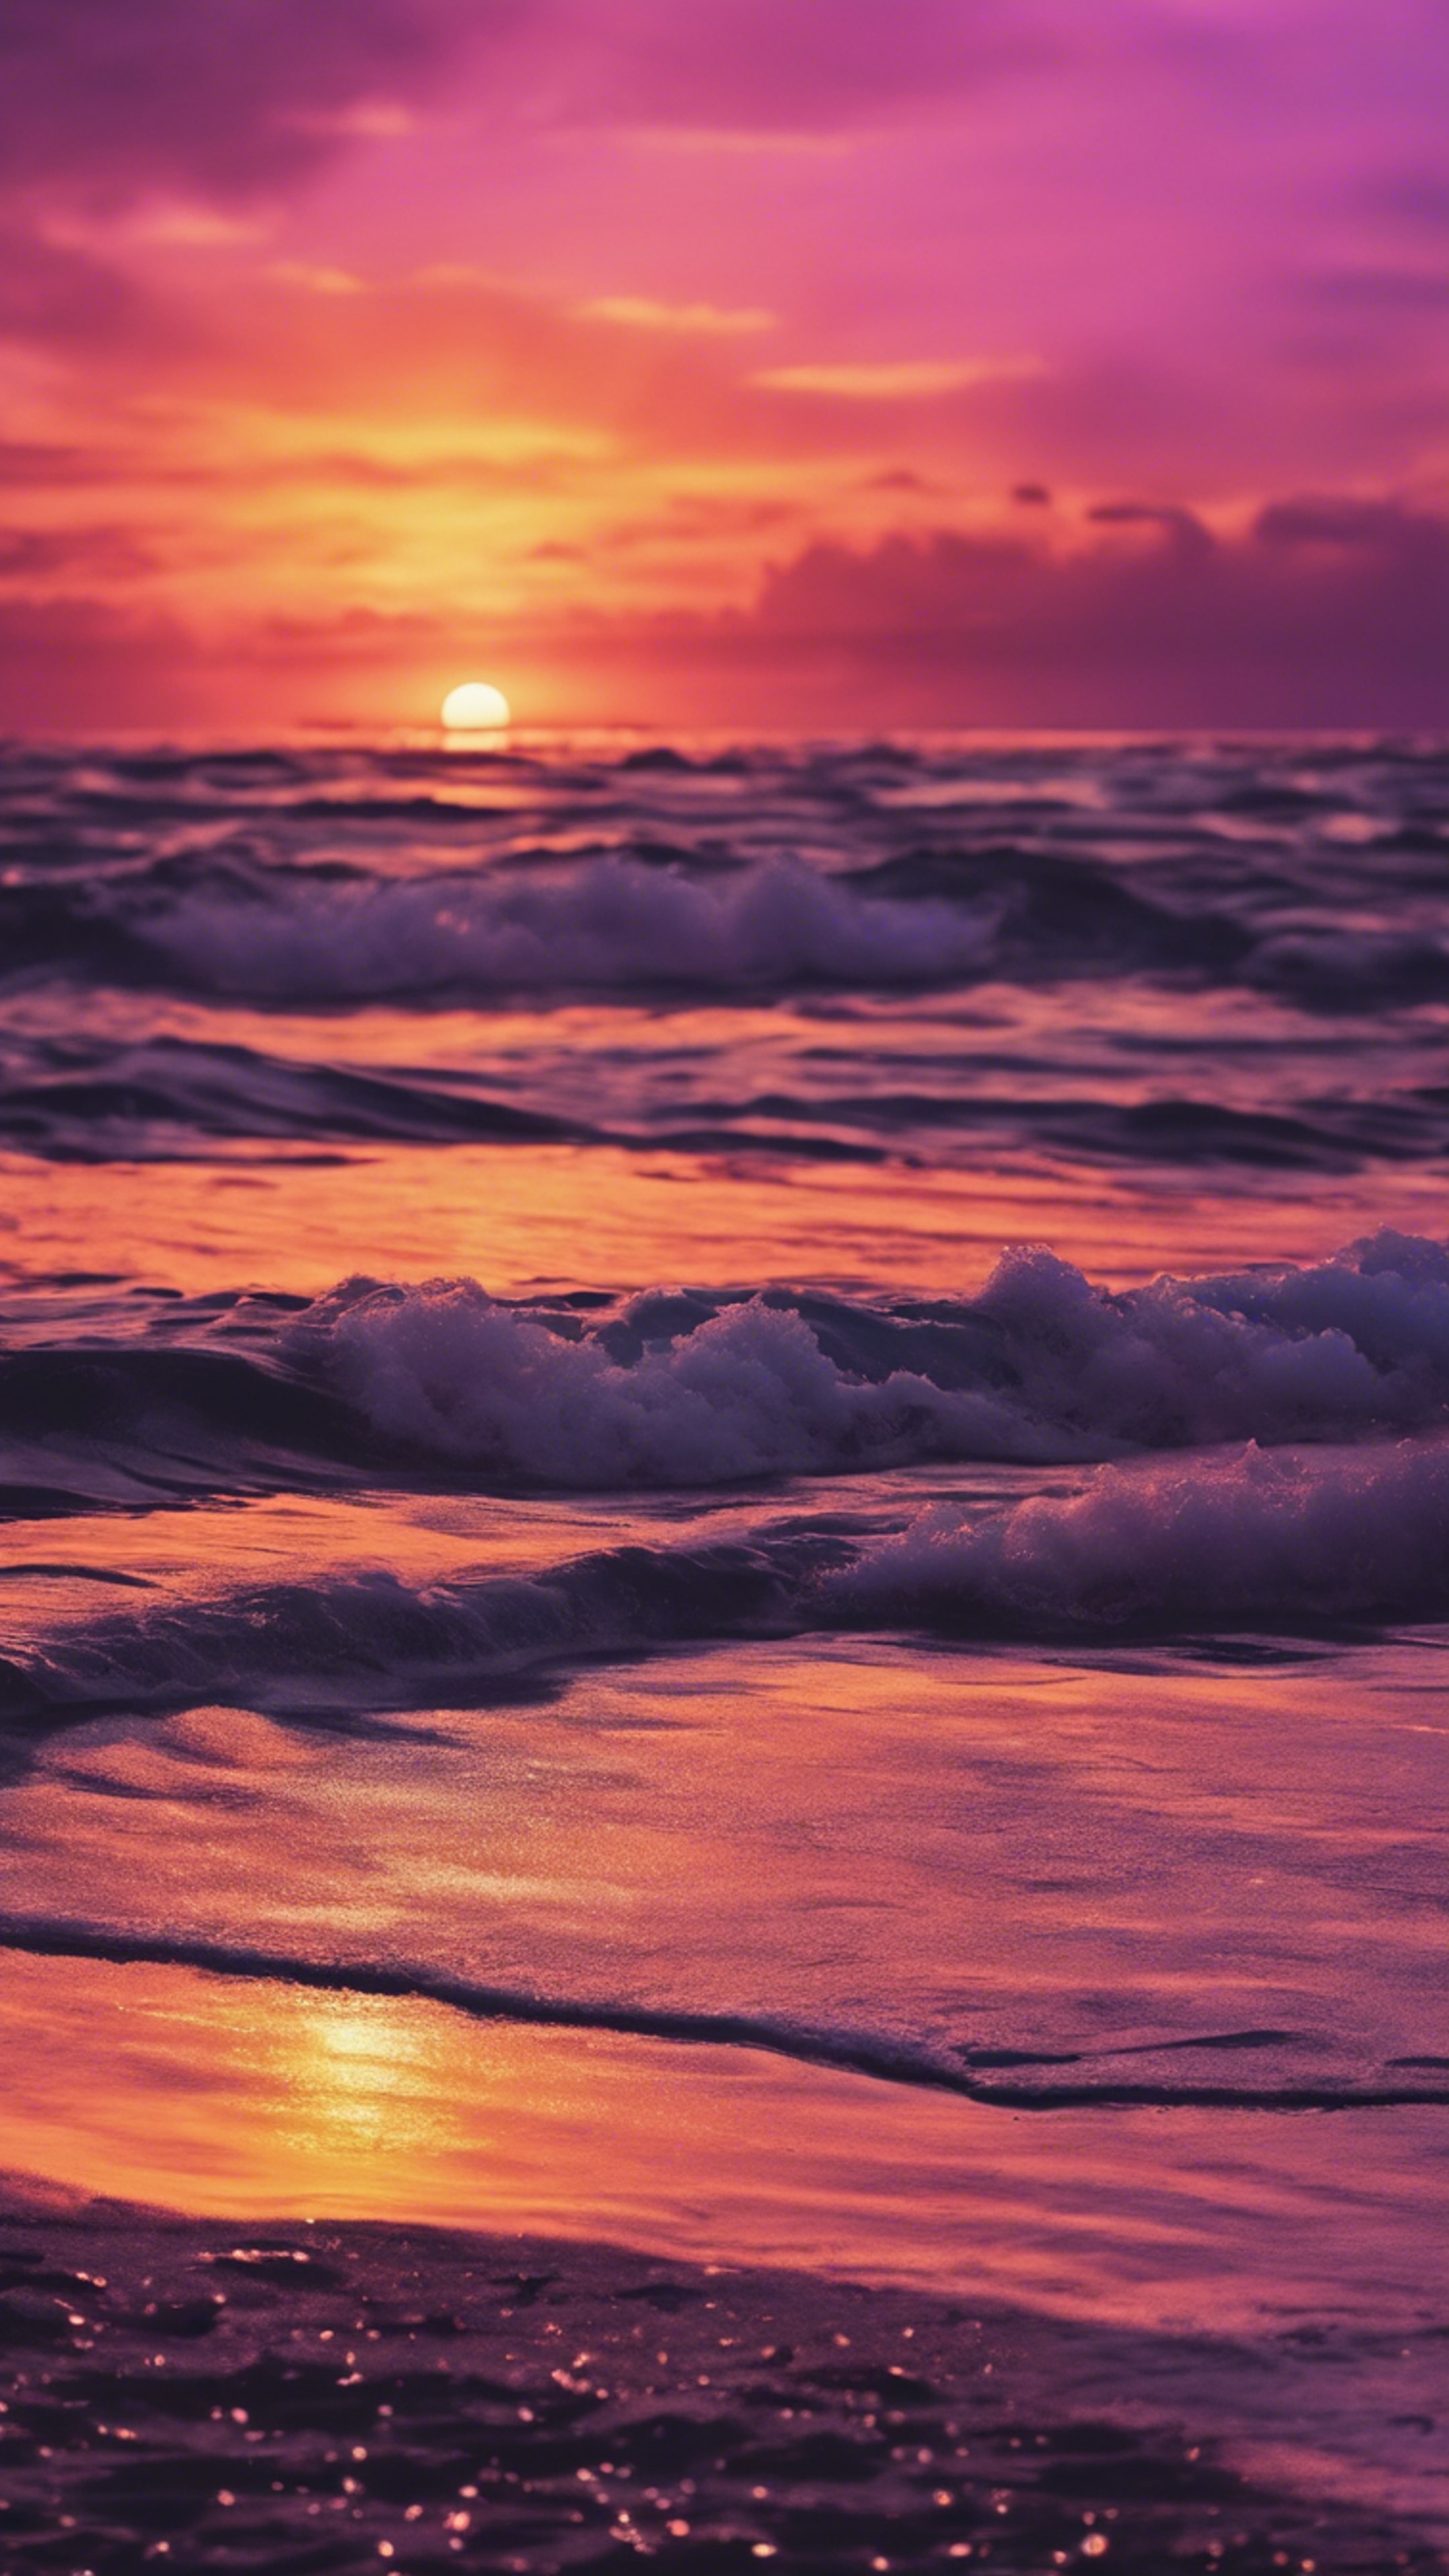 A vivid purple and orange sunset over a tranquil sea.壁紙[a5f37b905809497fb8a7]